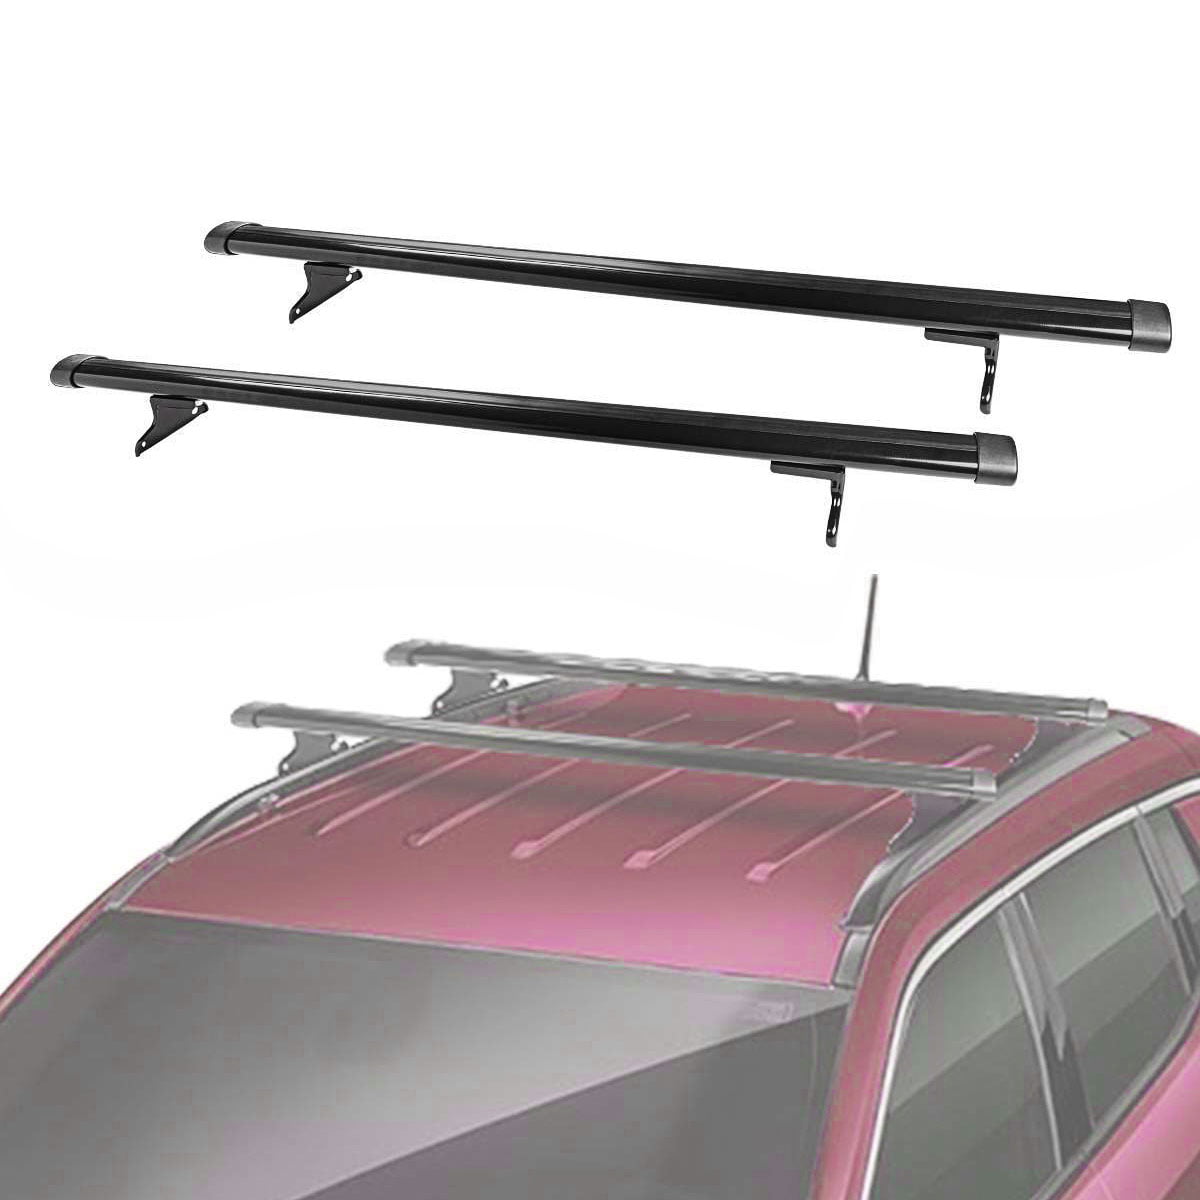 Roof Rack Aluminum Cross Bars For 2018-2022 Jeep Compass Cargo Carrier Replacement ,2-Pack 2018 Jeep Compass Roof Rack Cross Bars